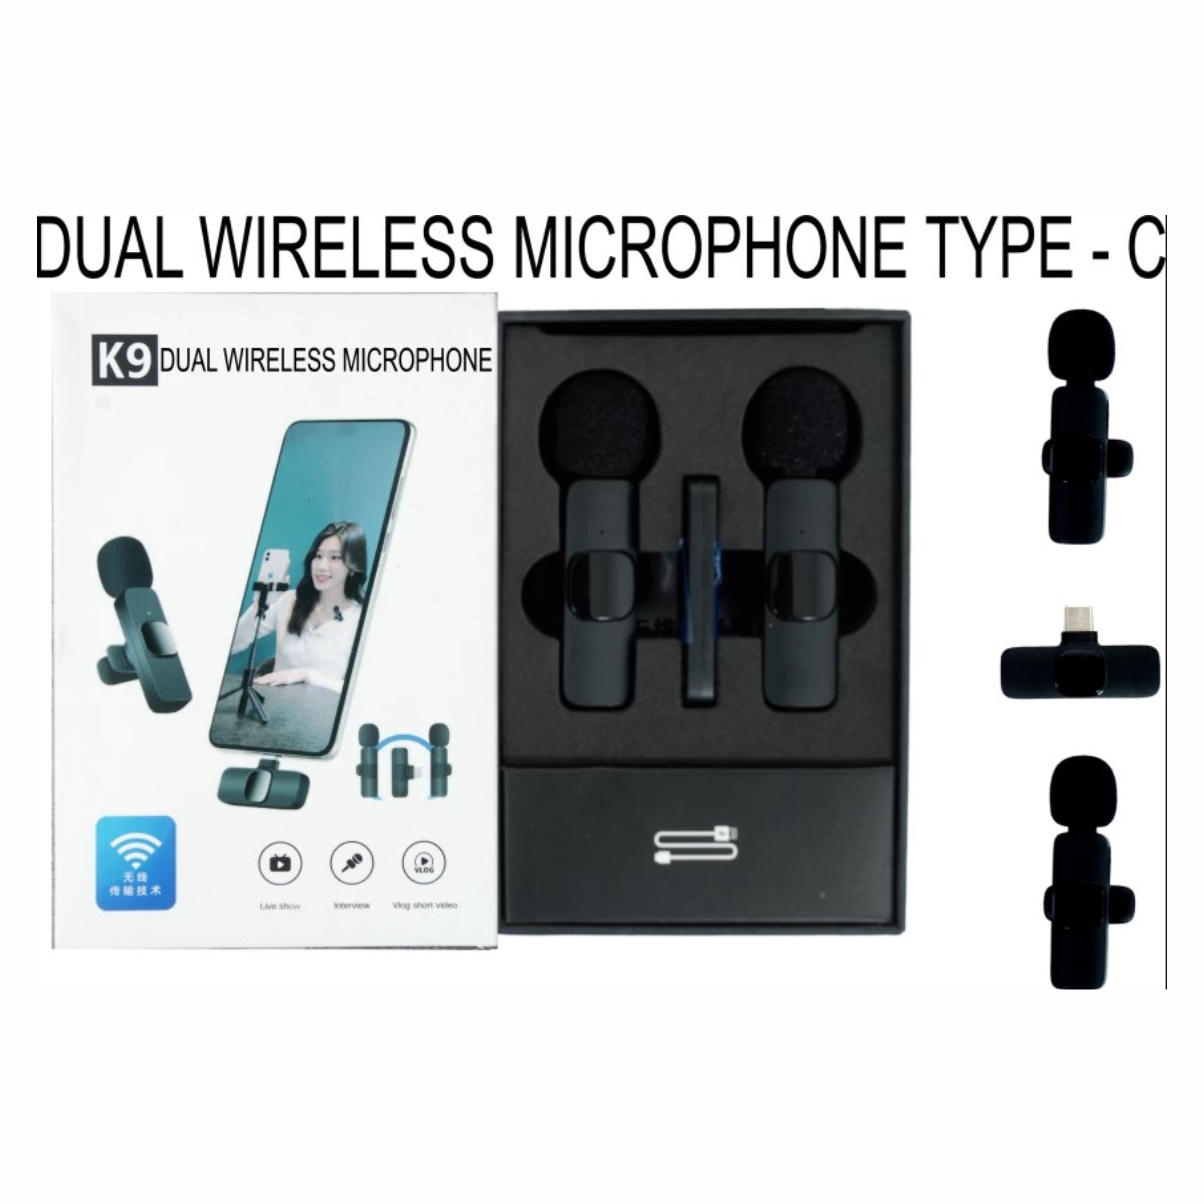 K9 WIRELESS MIC, All iOS / Android systems are suitable , Work for YouTube/Facebook Live Stream, real-time auto-sync technology